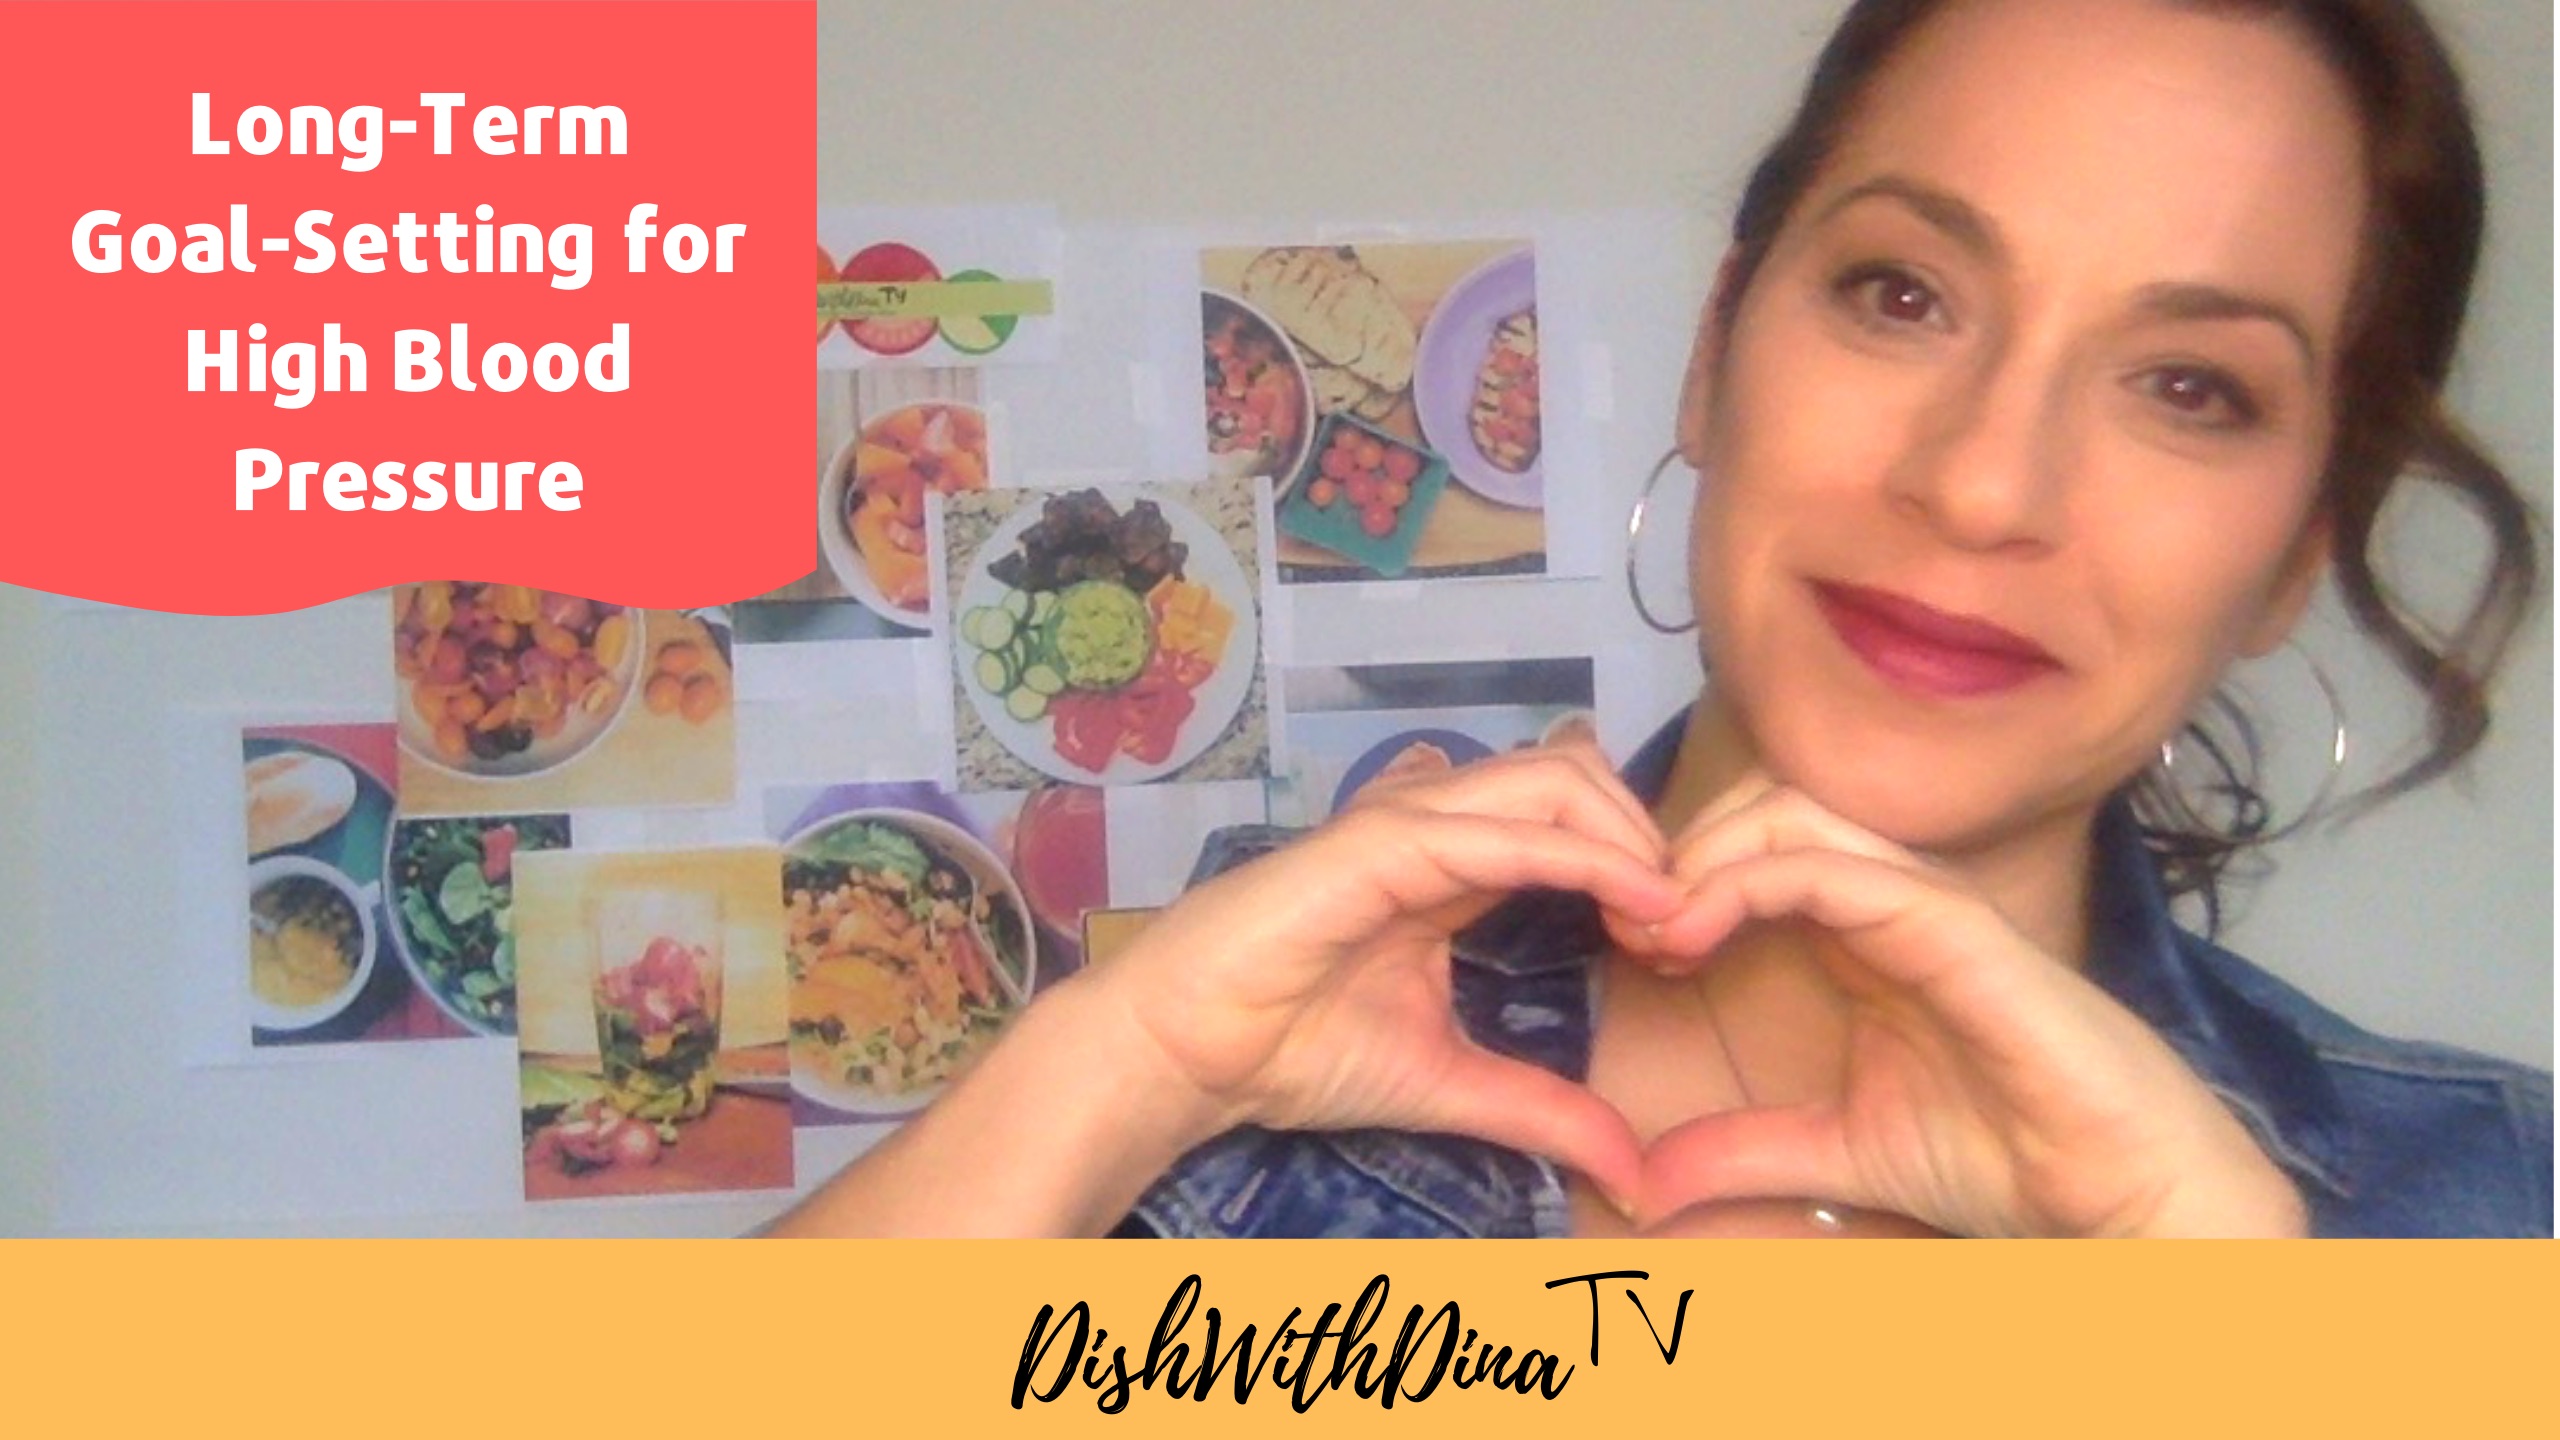 YouTube video thumbnail with video name and "DishWithDinaTV" logo. Dina with hands in heart shape against wall with photos of food.